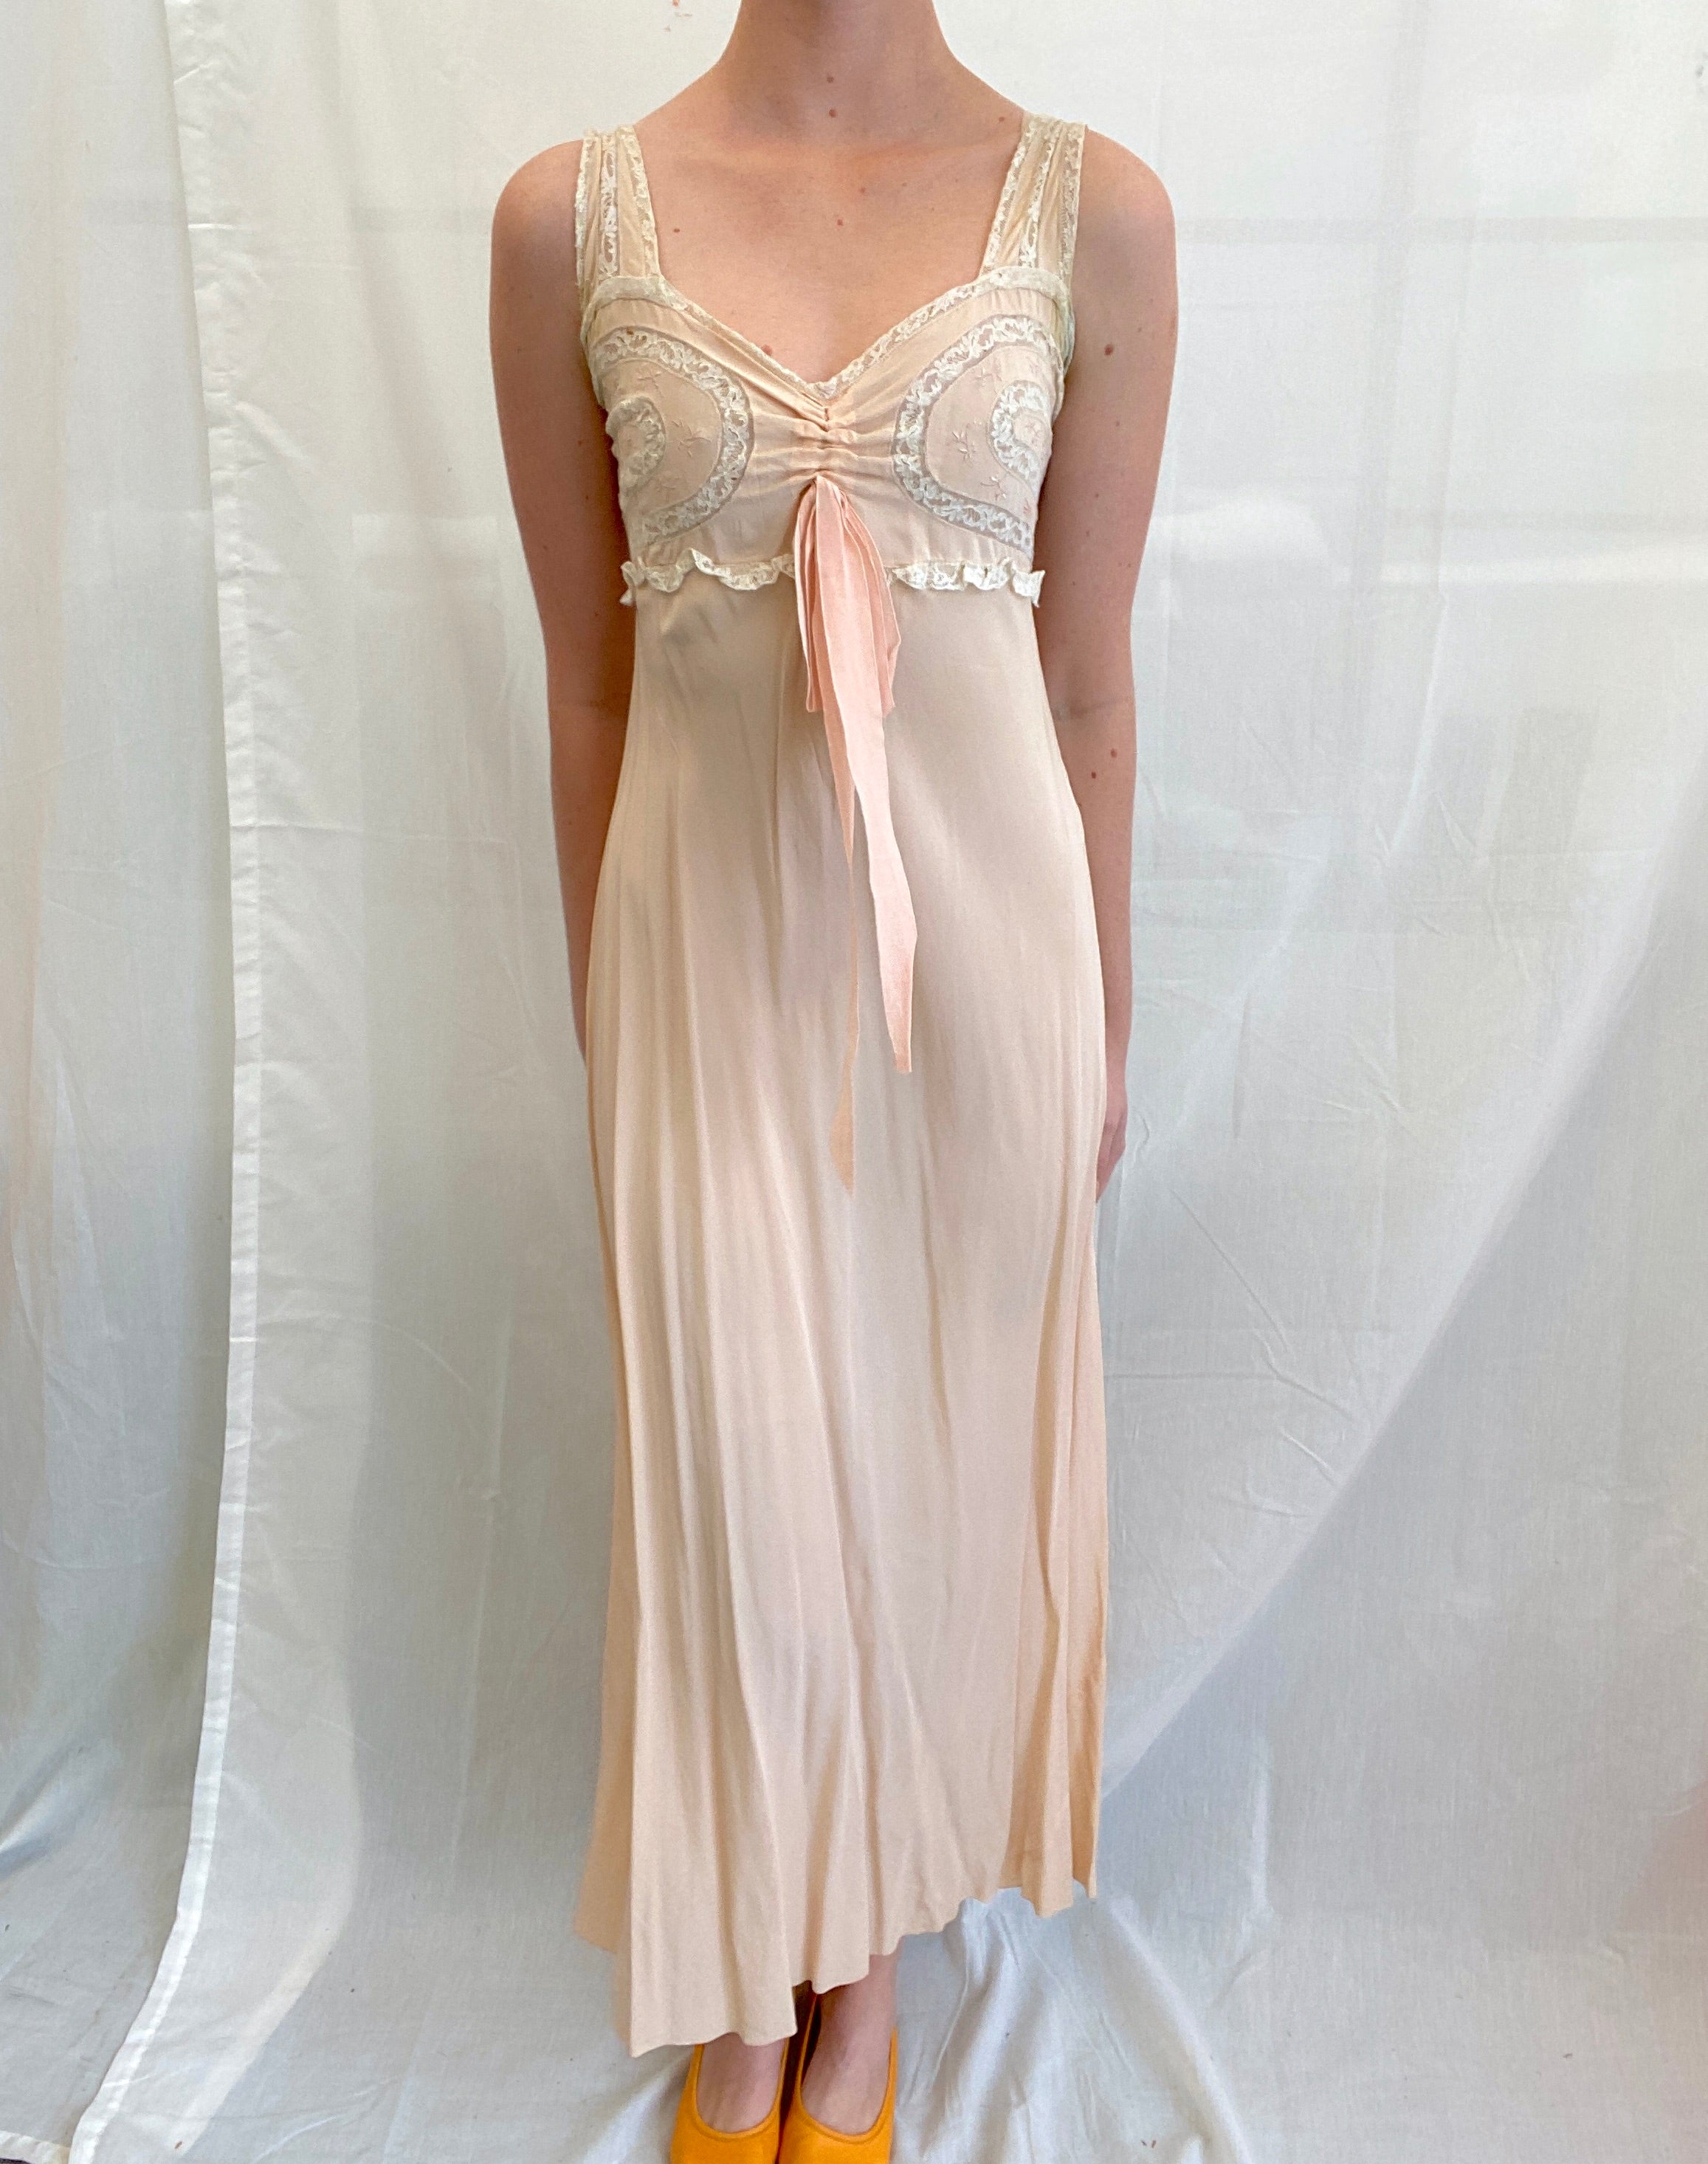 1930's Pale Pink Silk Slip with White Lace